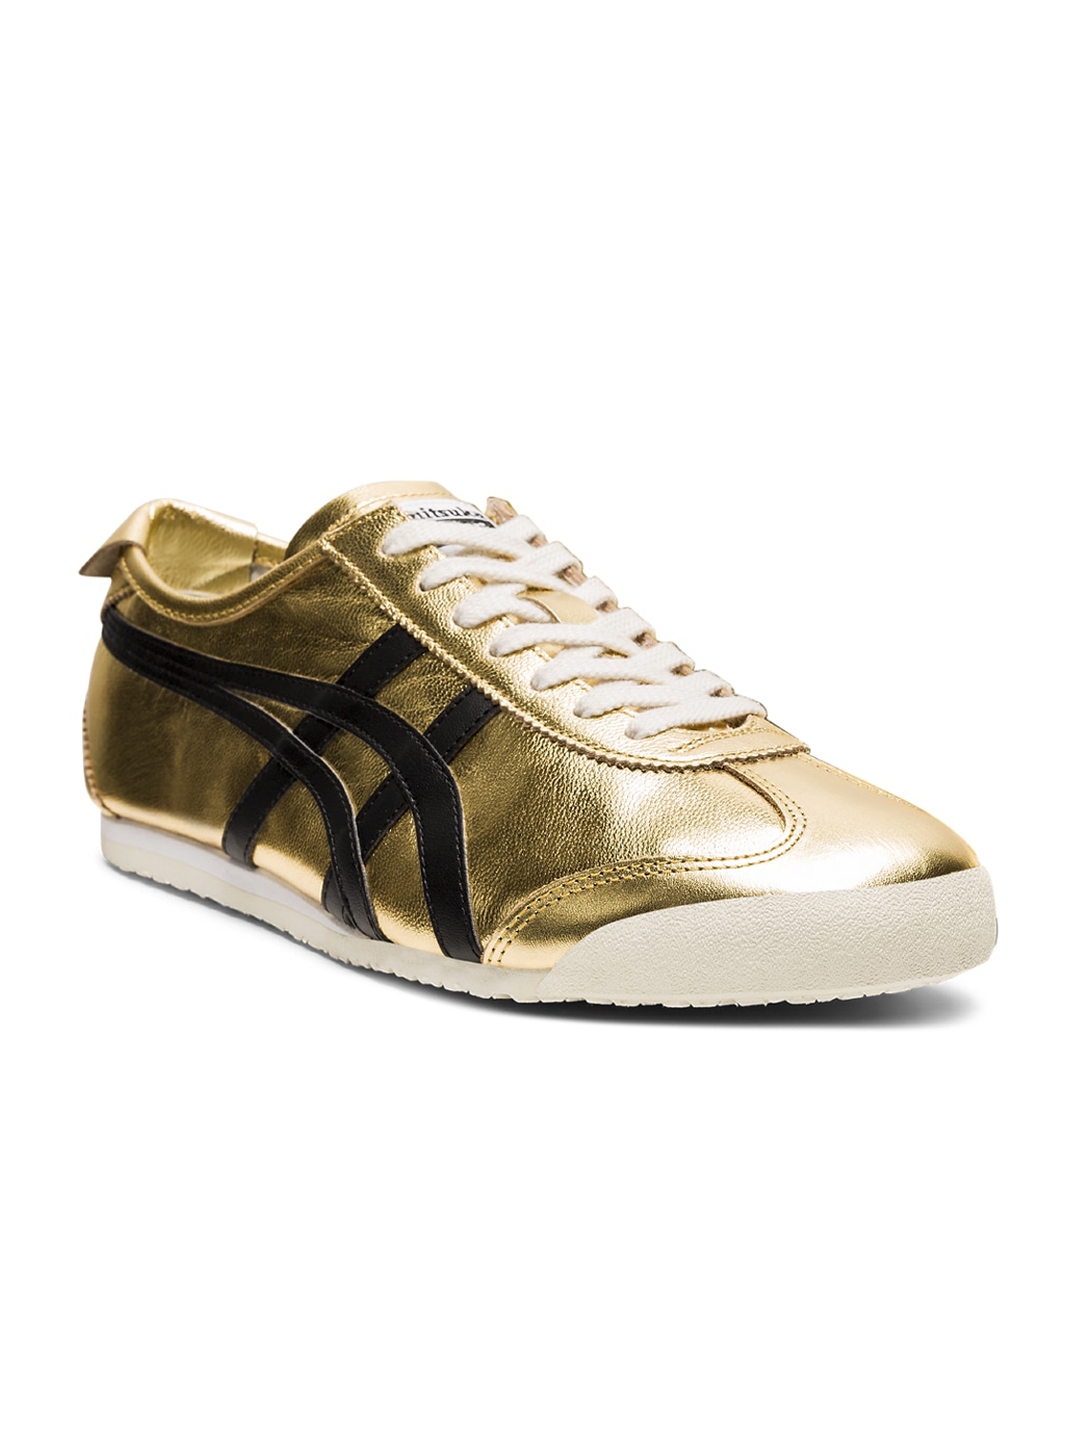 Buy Onitsuka Tiger Unisex Gold Black Leather Sneakers Mexico 66 ...